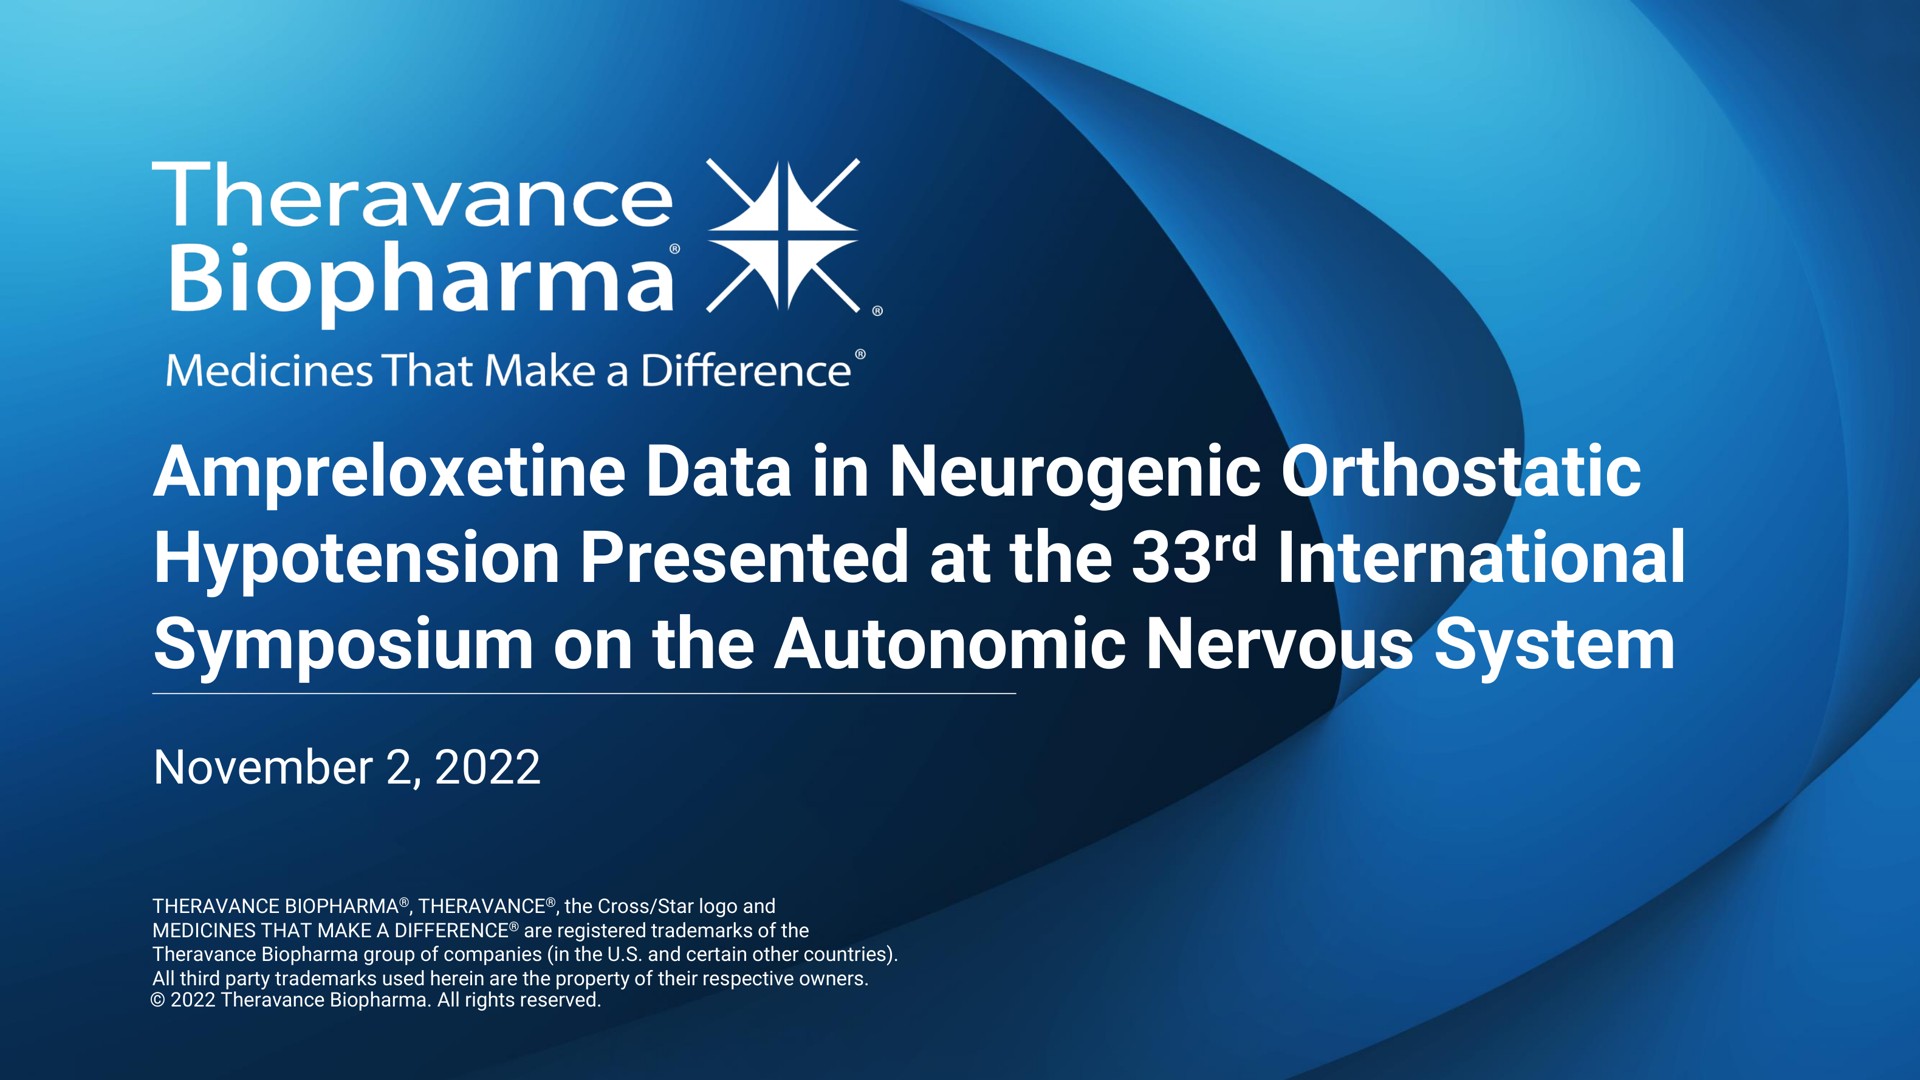 data in neurogenic orthostatic hypotension presented at the international symposium on the autonomic nervous system | Theravance Biopharma